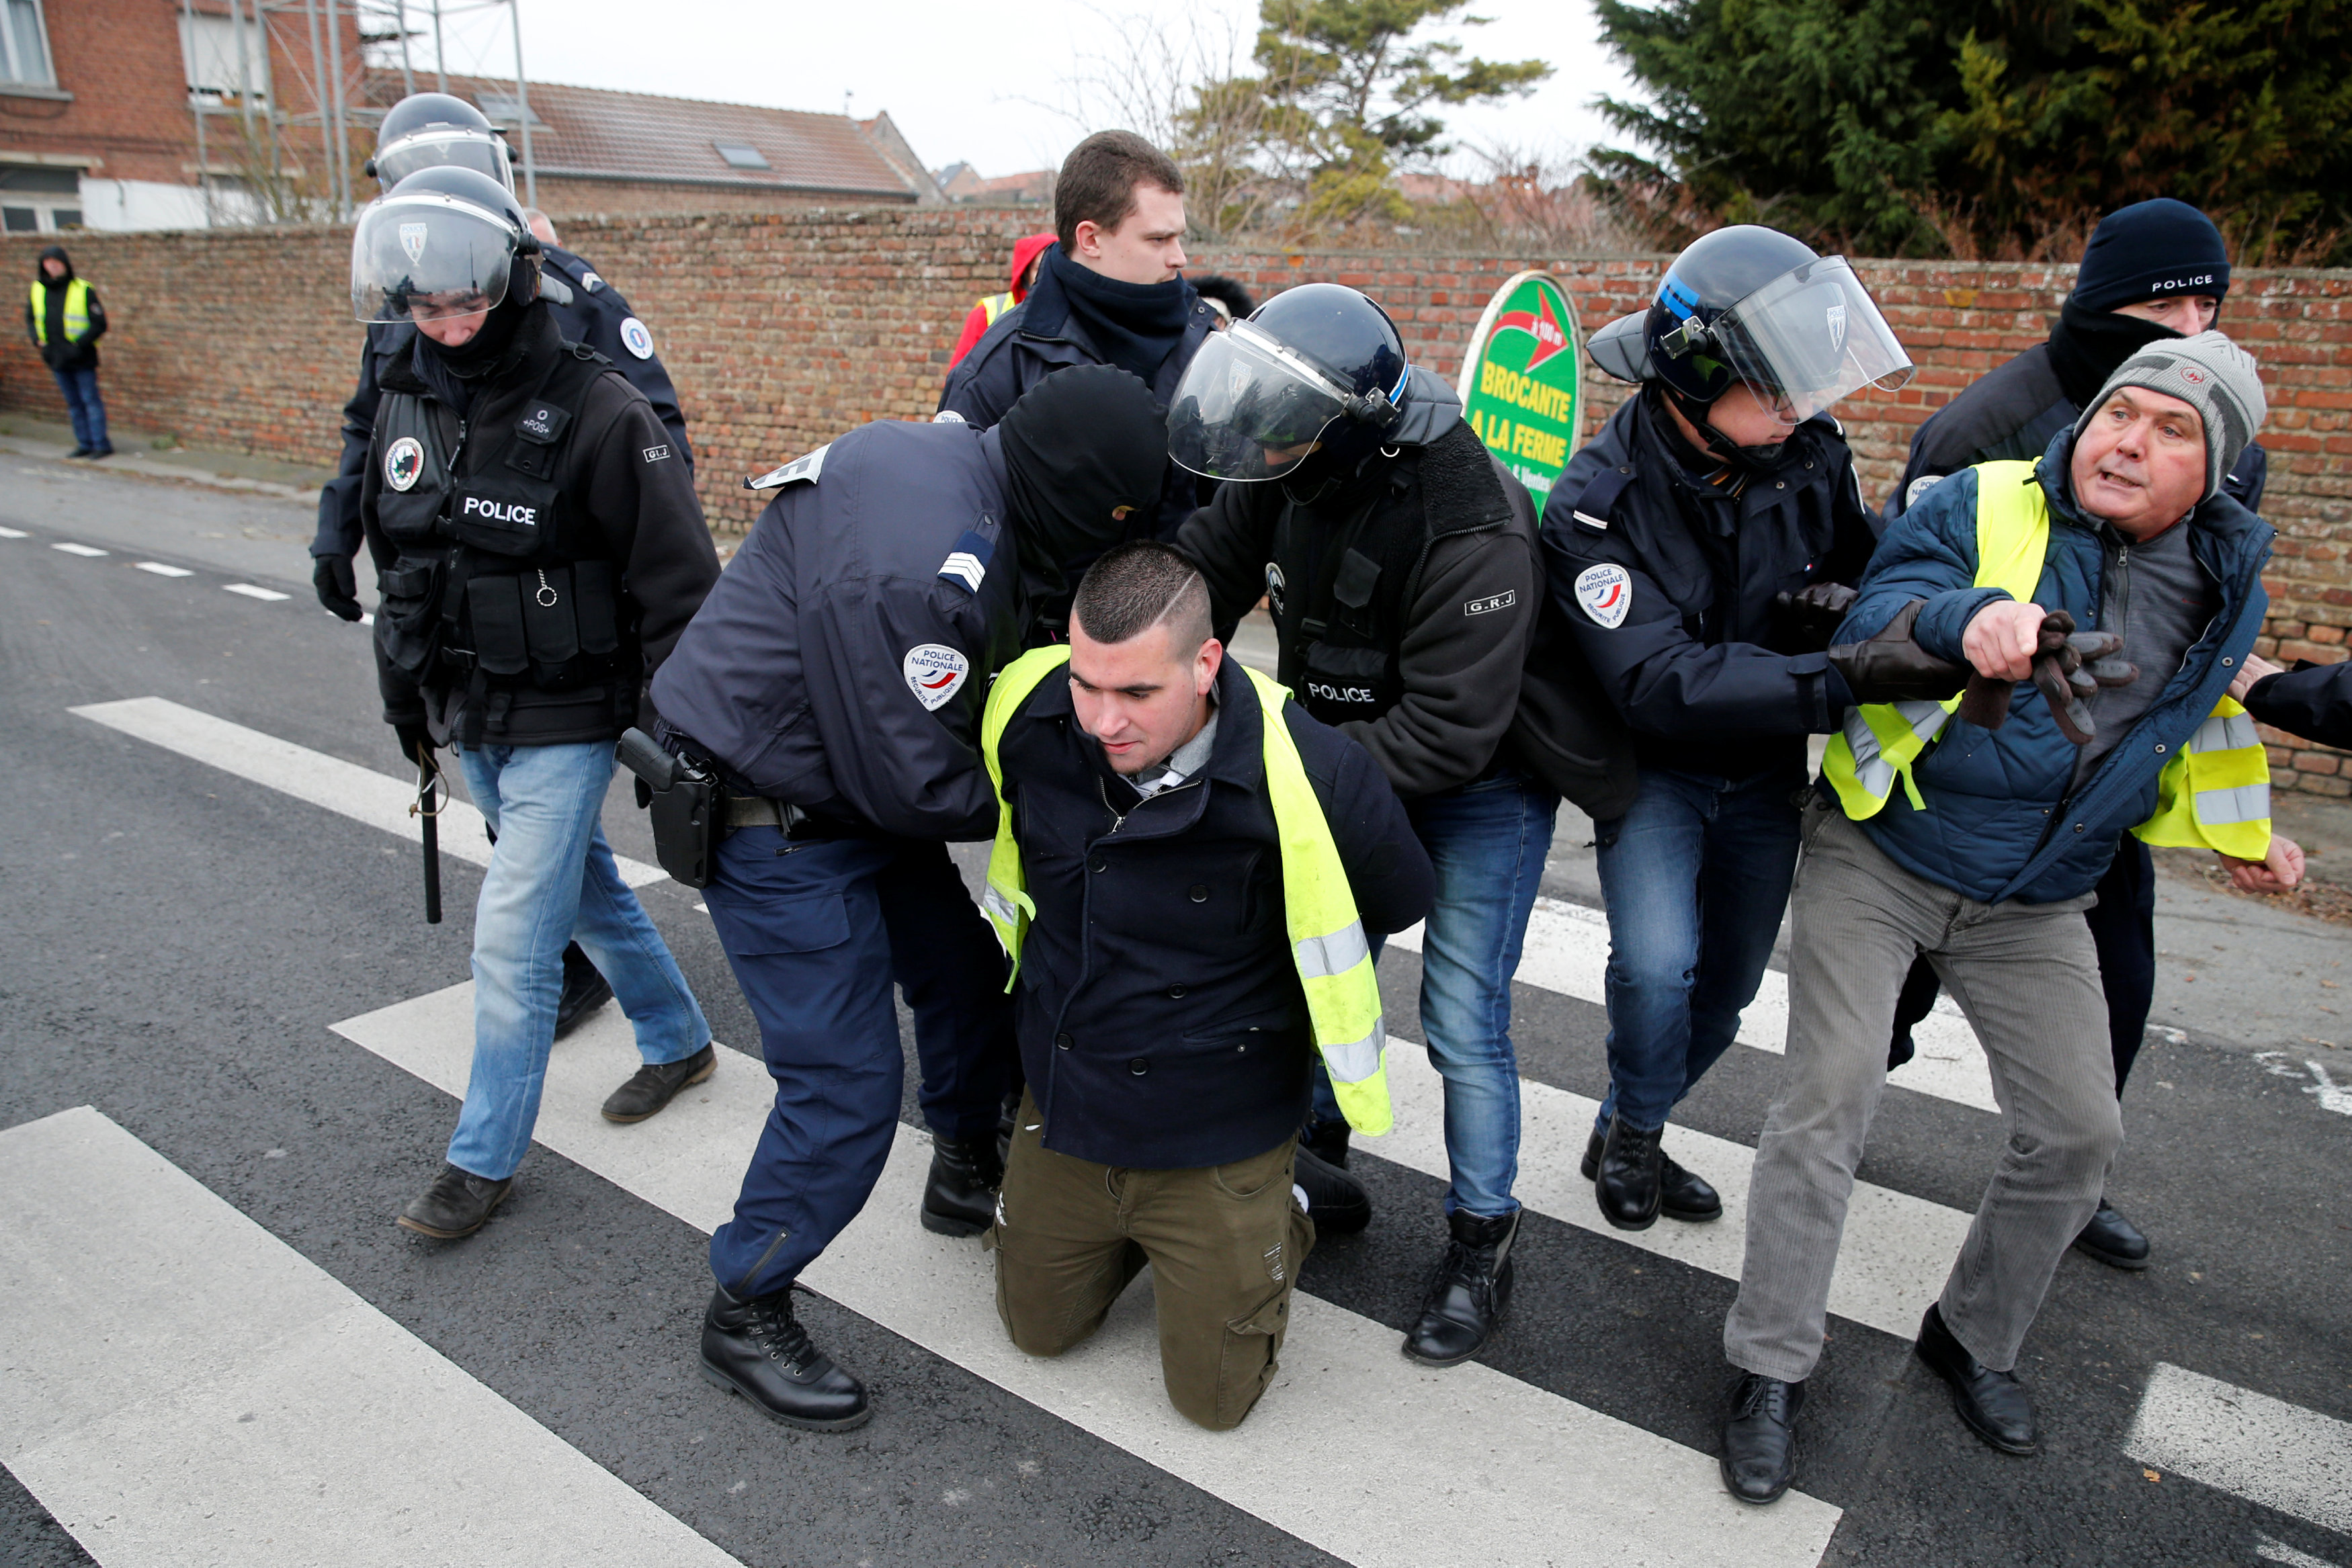 2018-12-15T110628Z_786524760_RC1ED9682770_RTRMADP_3_FRANCE-PROTESTS